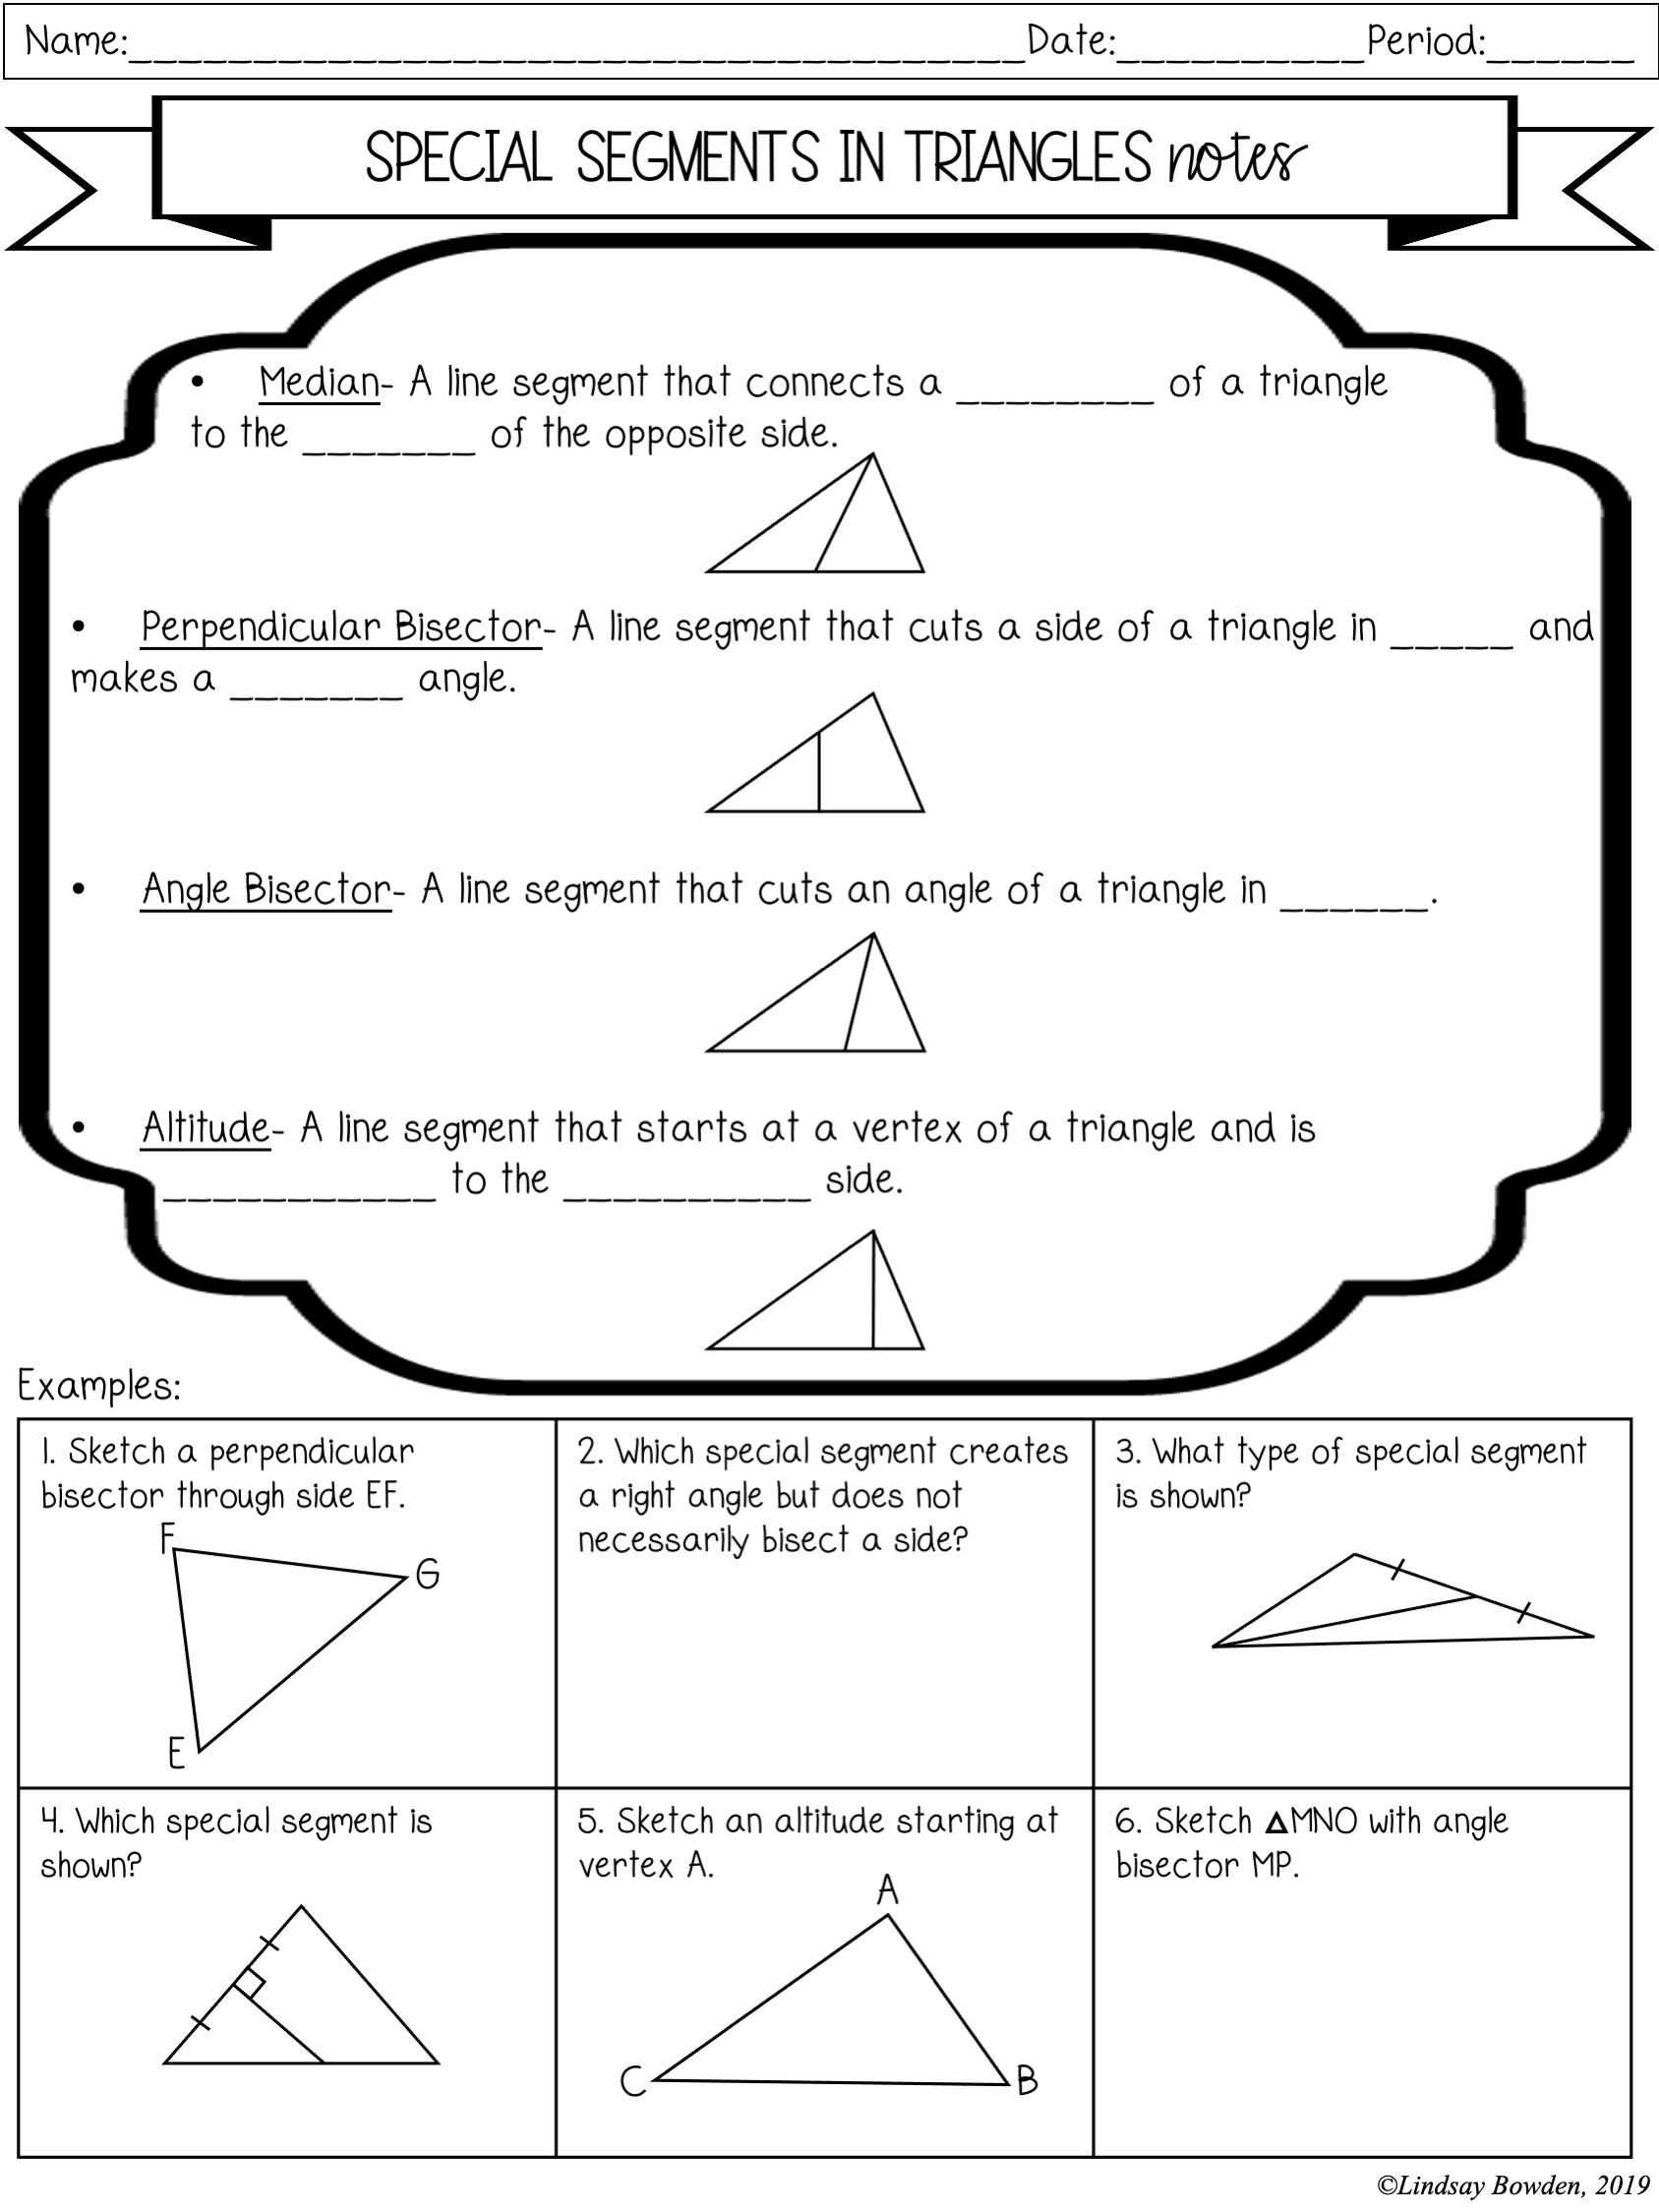 Triangle Centers Notes and Worksheets - Lindsay Bowden With Regard To Centers Of Triangles Worksheet